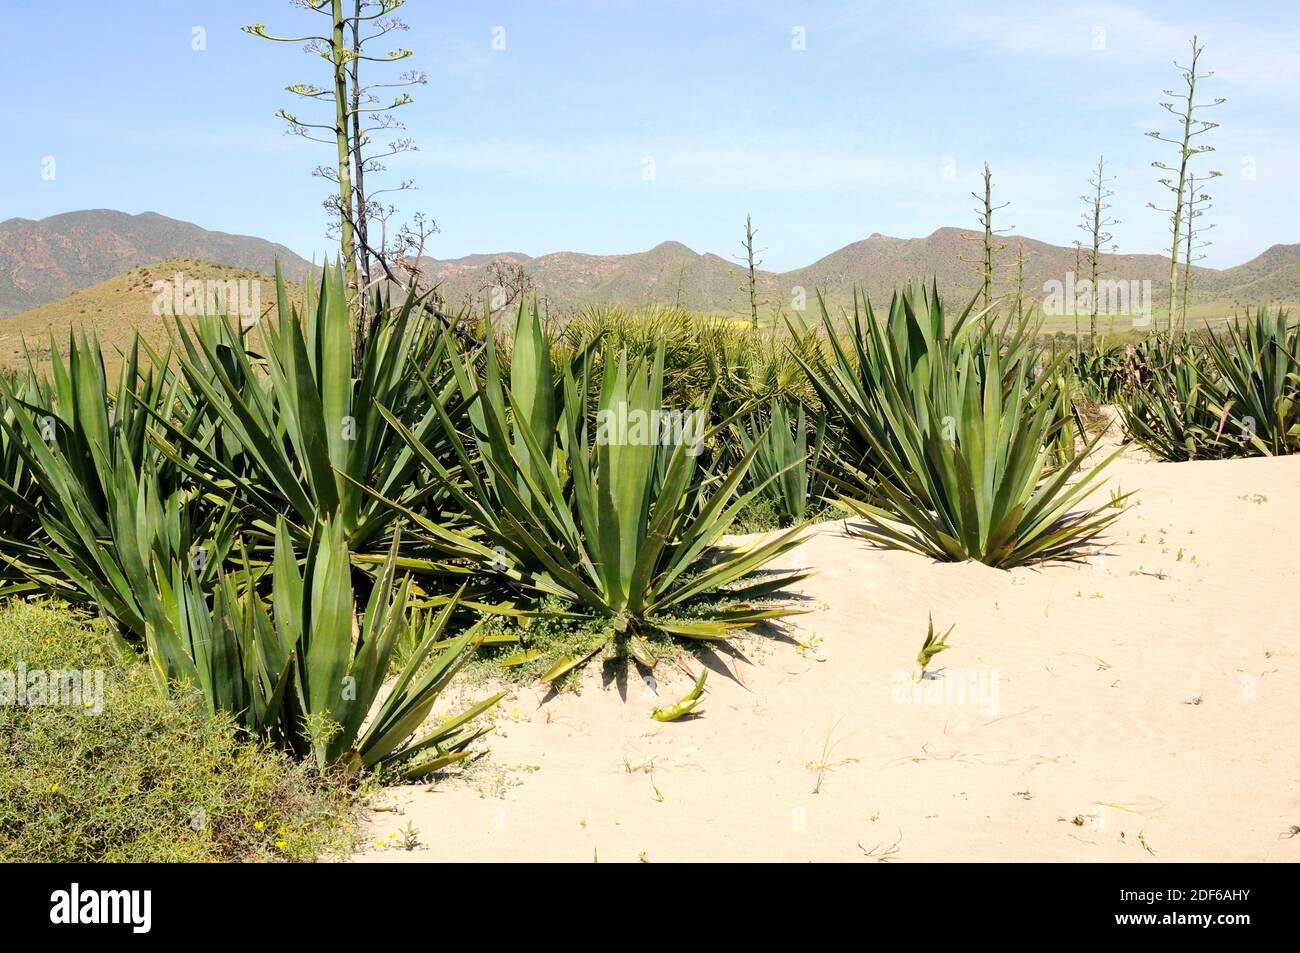 Sisal (Agave sisalana) yields a stiff fibre used in making various products. Is native to southern Mexico but widely cultivated and naturalized in Stock Photo